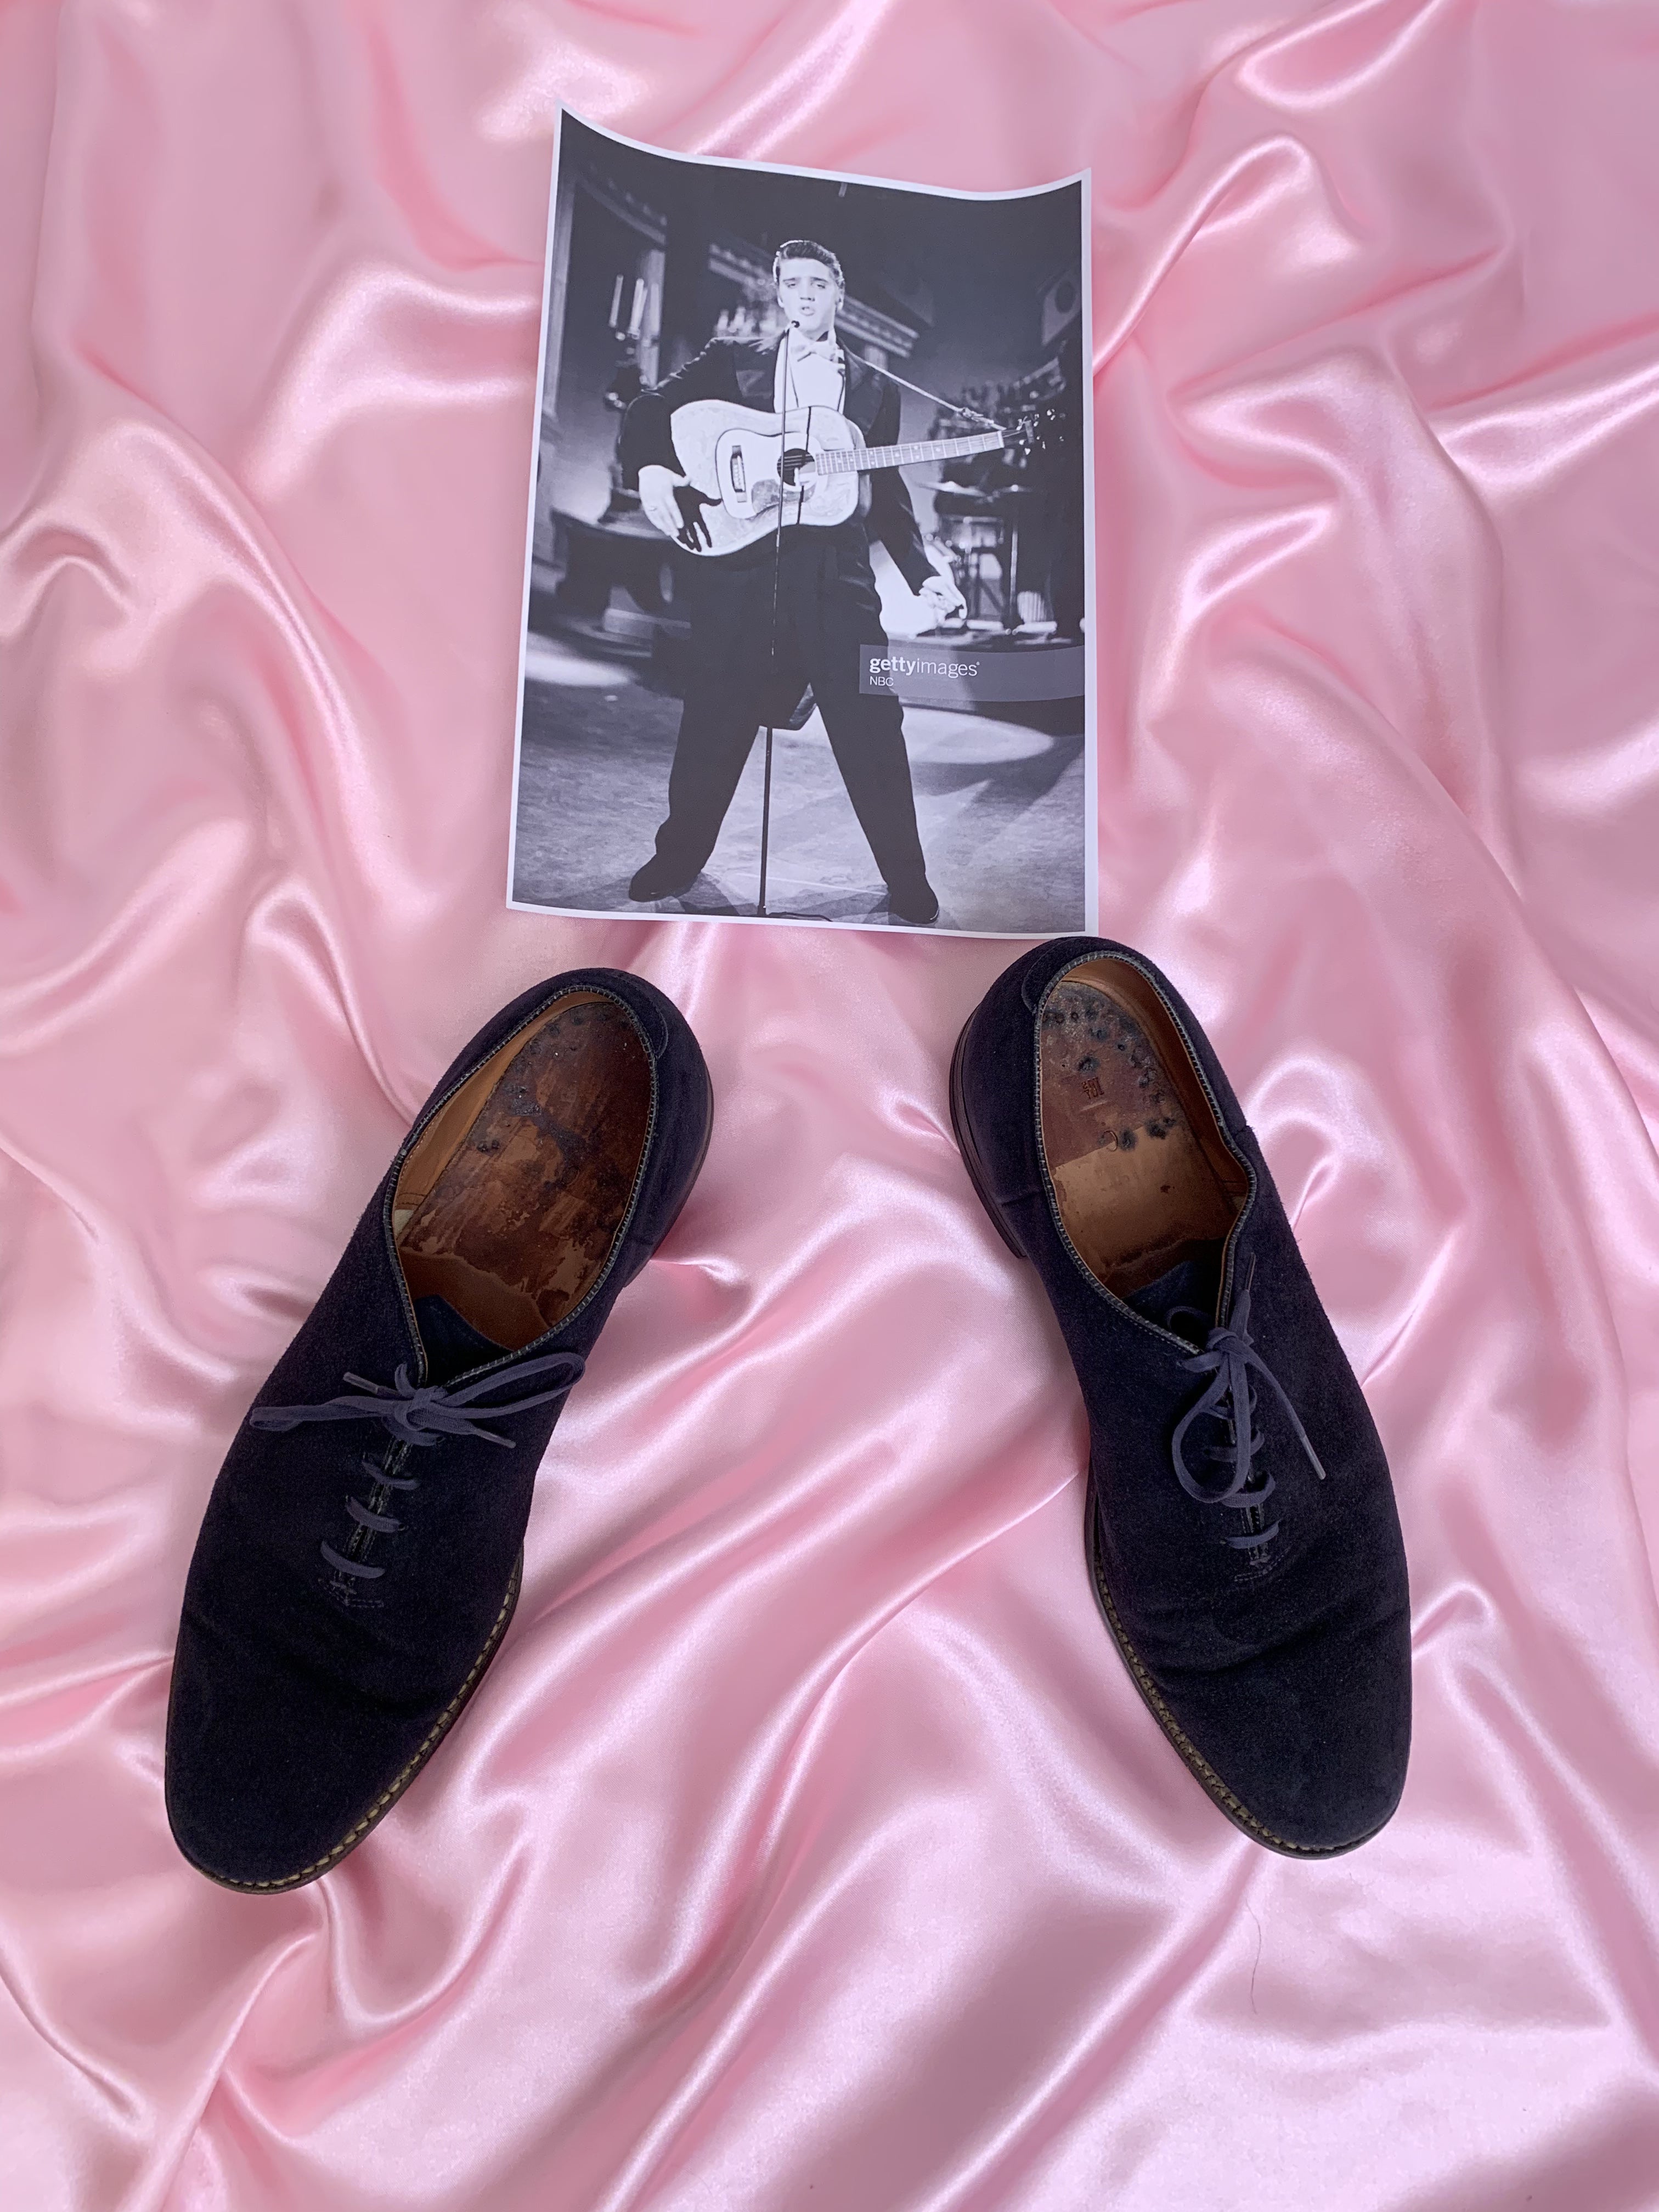 Elvis Presley’s blue suede shoes, pictured, sold for more than $150,000 on Friday